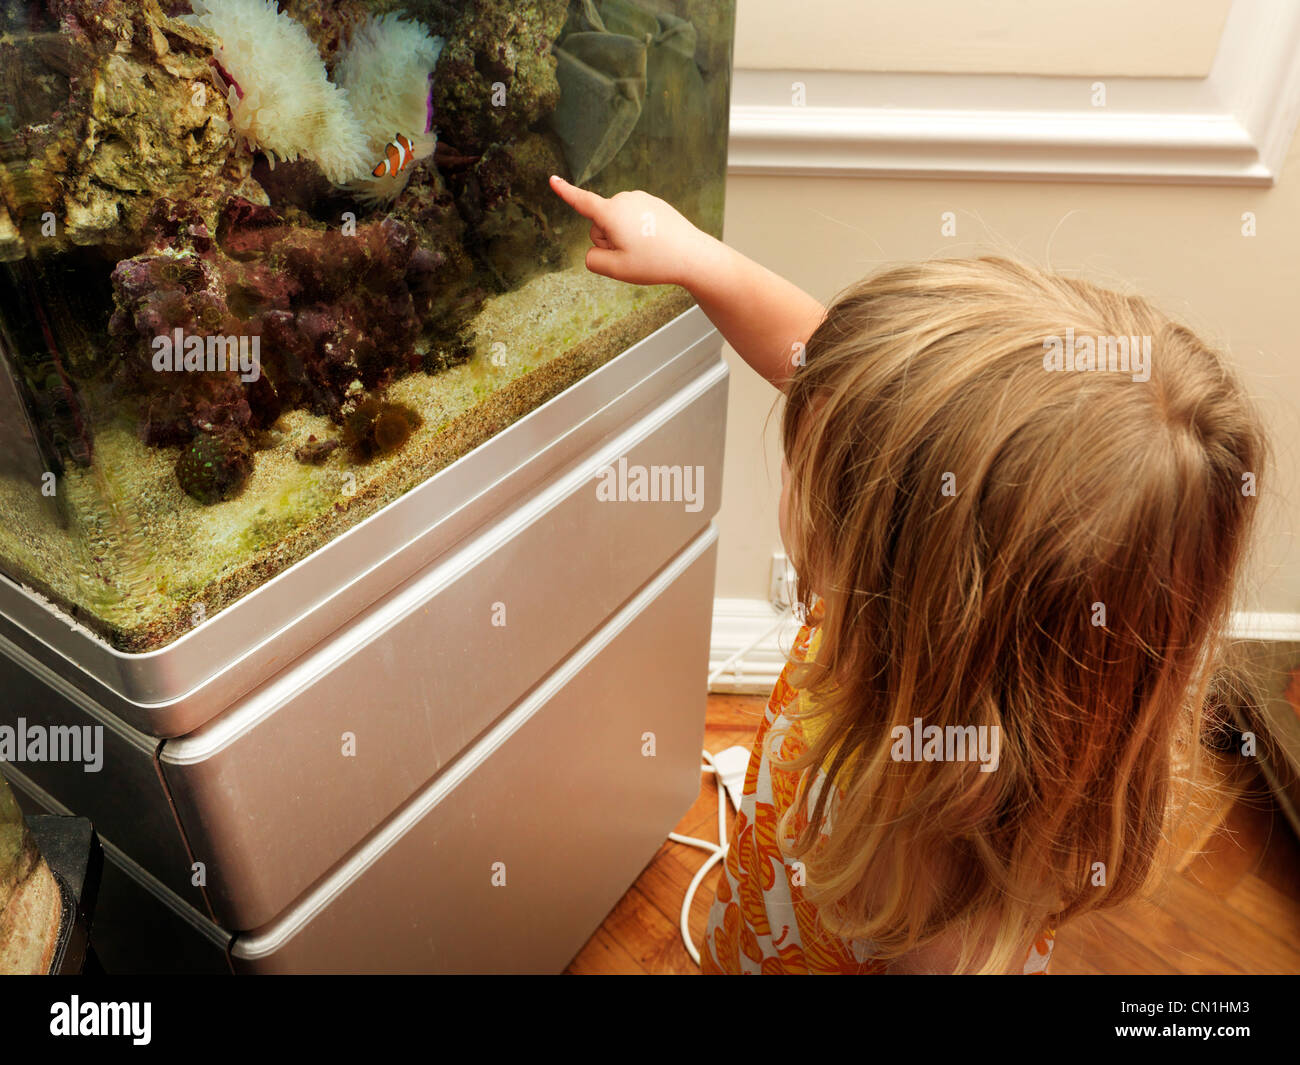 Young Girl Looking A Fish In Saltwater Fish Tank Pointing At Clownfish Stock Photo